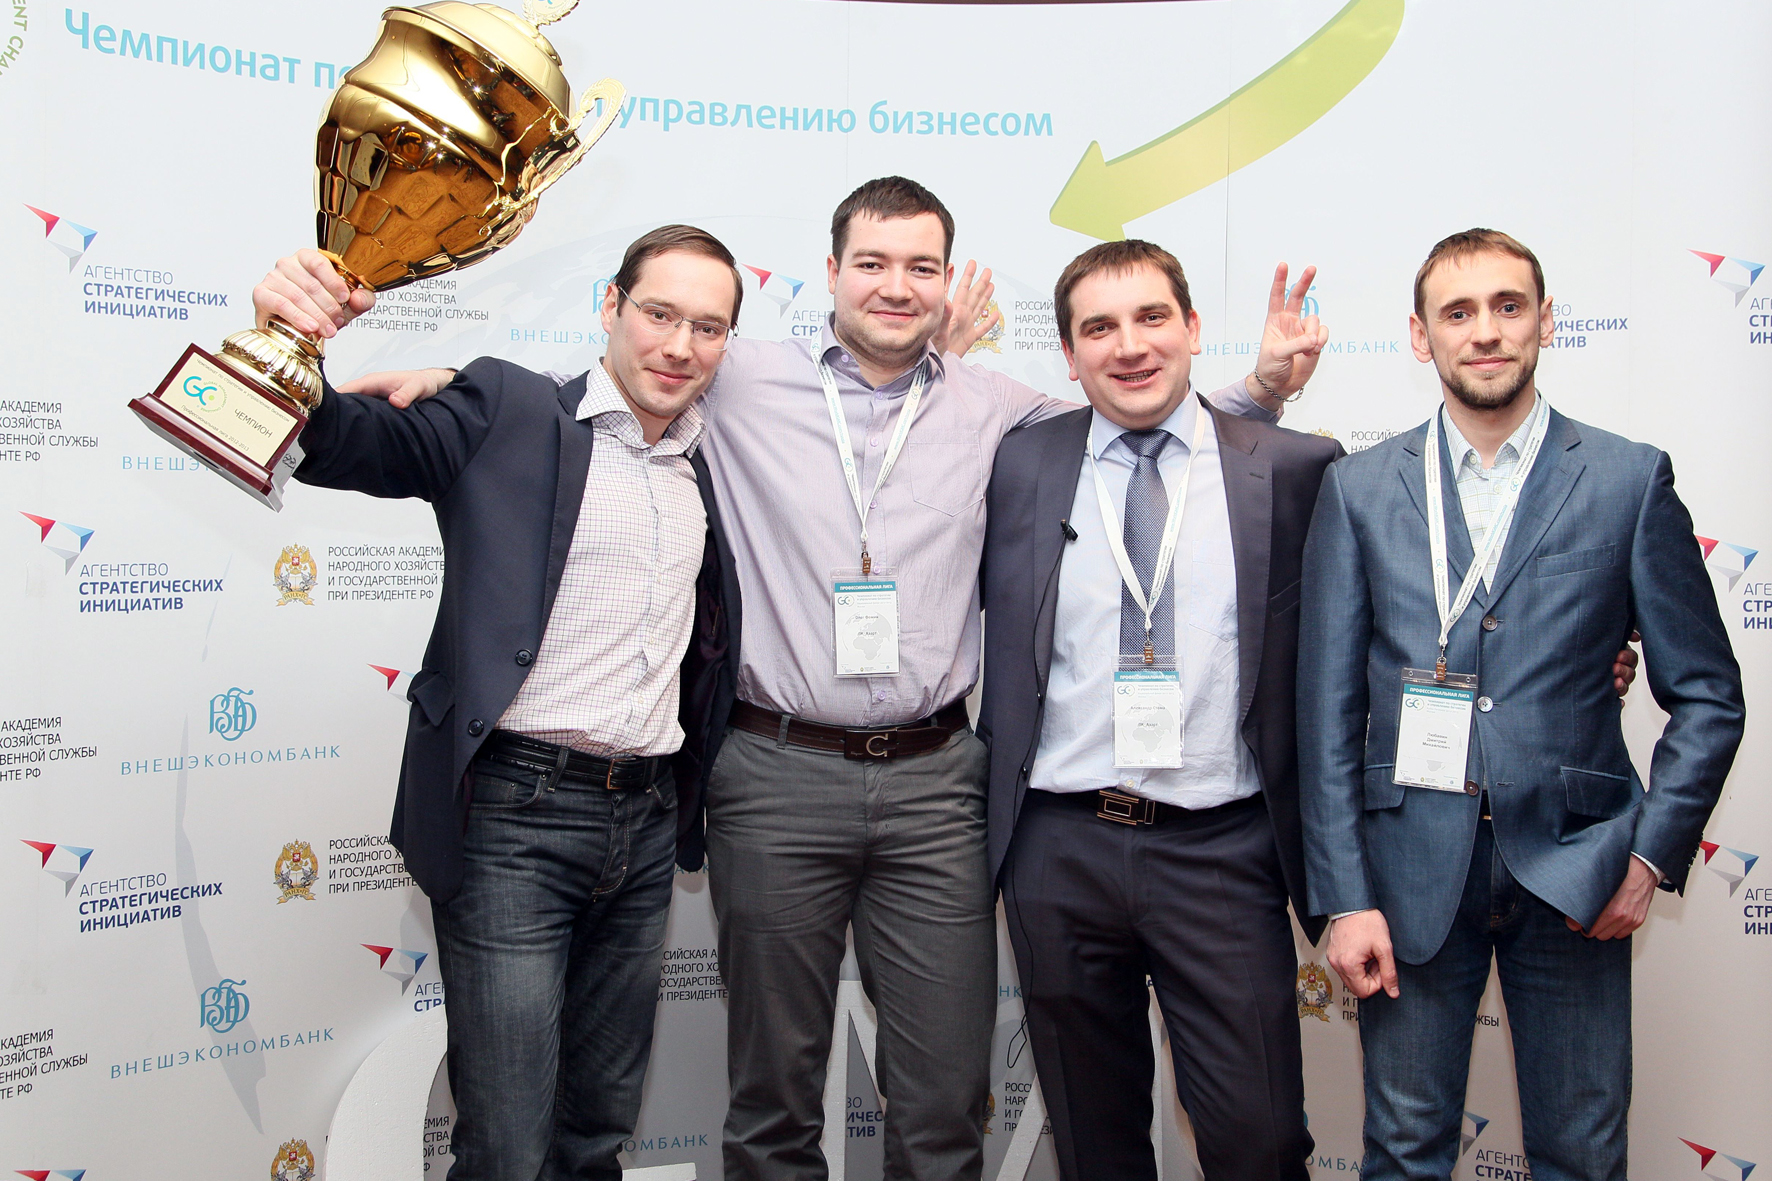 Russia: how to attract 10 000 + participants annually